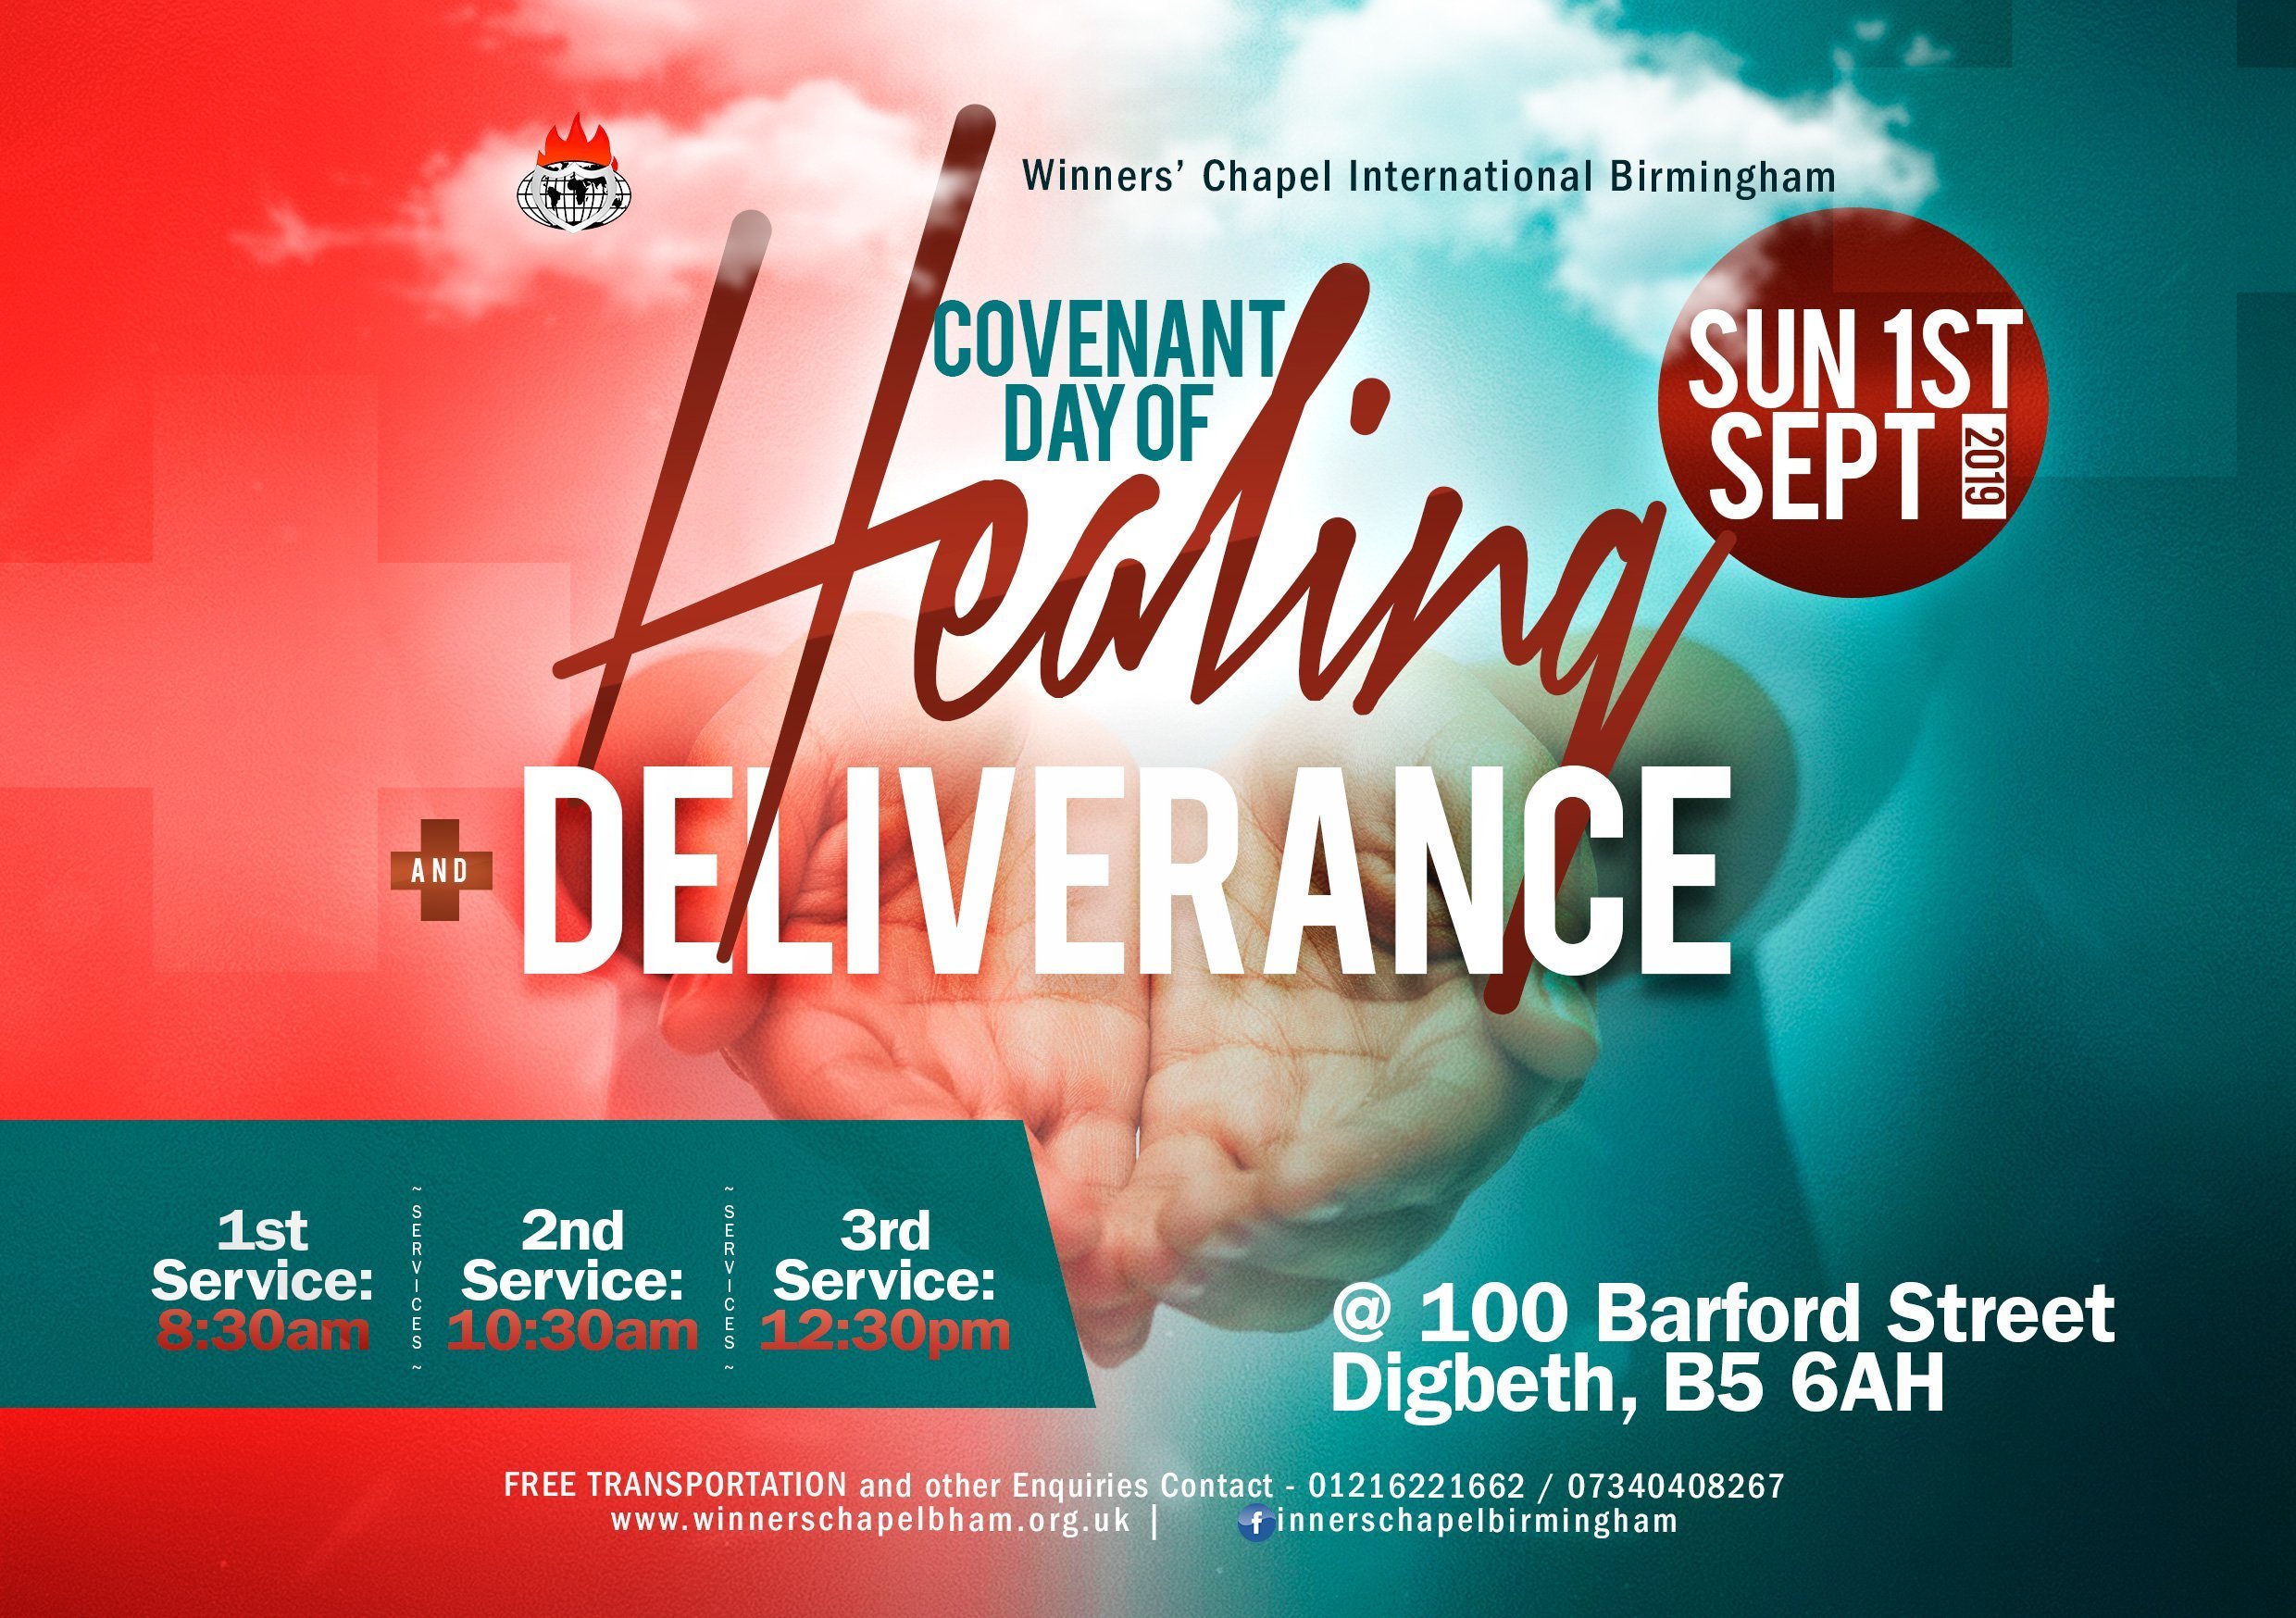 SERVICE ANNOUNCEMENTS FOR SUNDAY, SEPTEMBER 1ST 2019